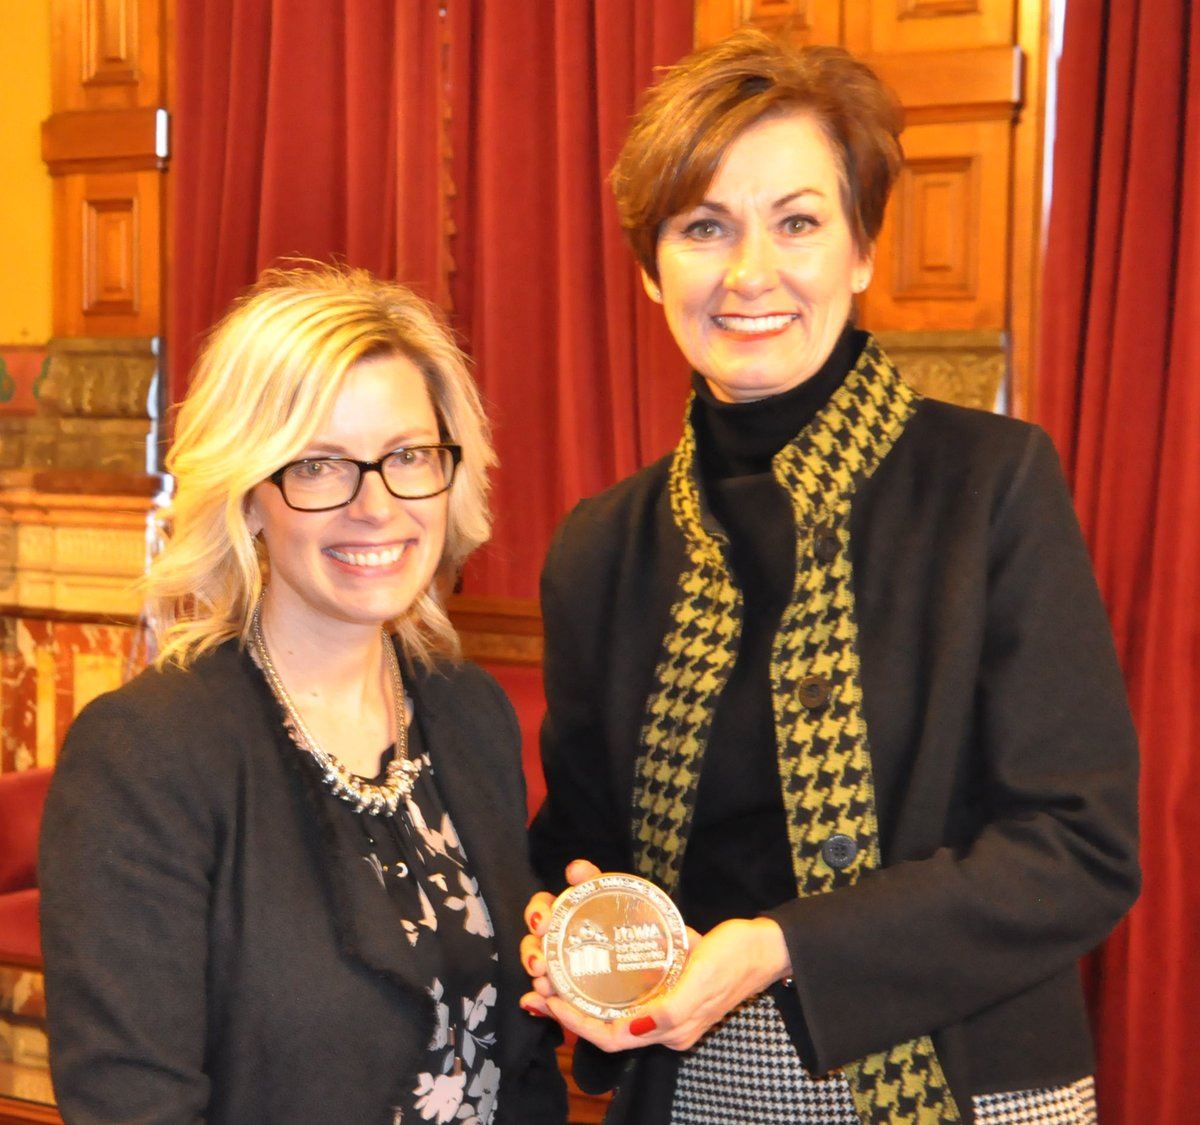 President Aimee Hospodarsky presents Governor Reynolds with a mediallion honoring the three tenants of school counseling.  President Aimee Hospodarsky presents Governor Reynolds with a medallion honoring the three tenants of school counseling.